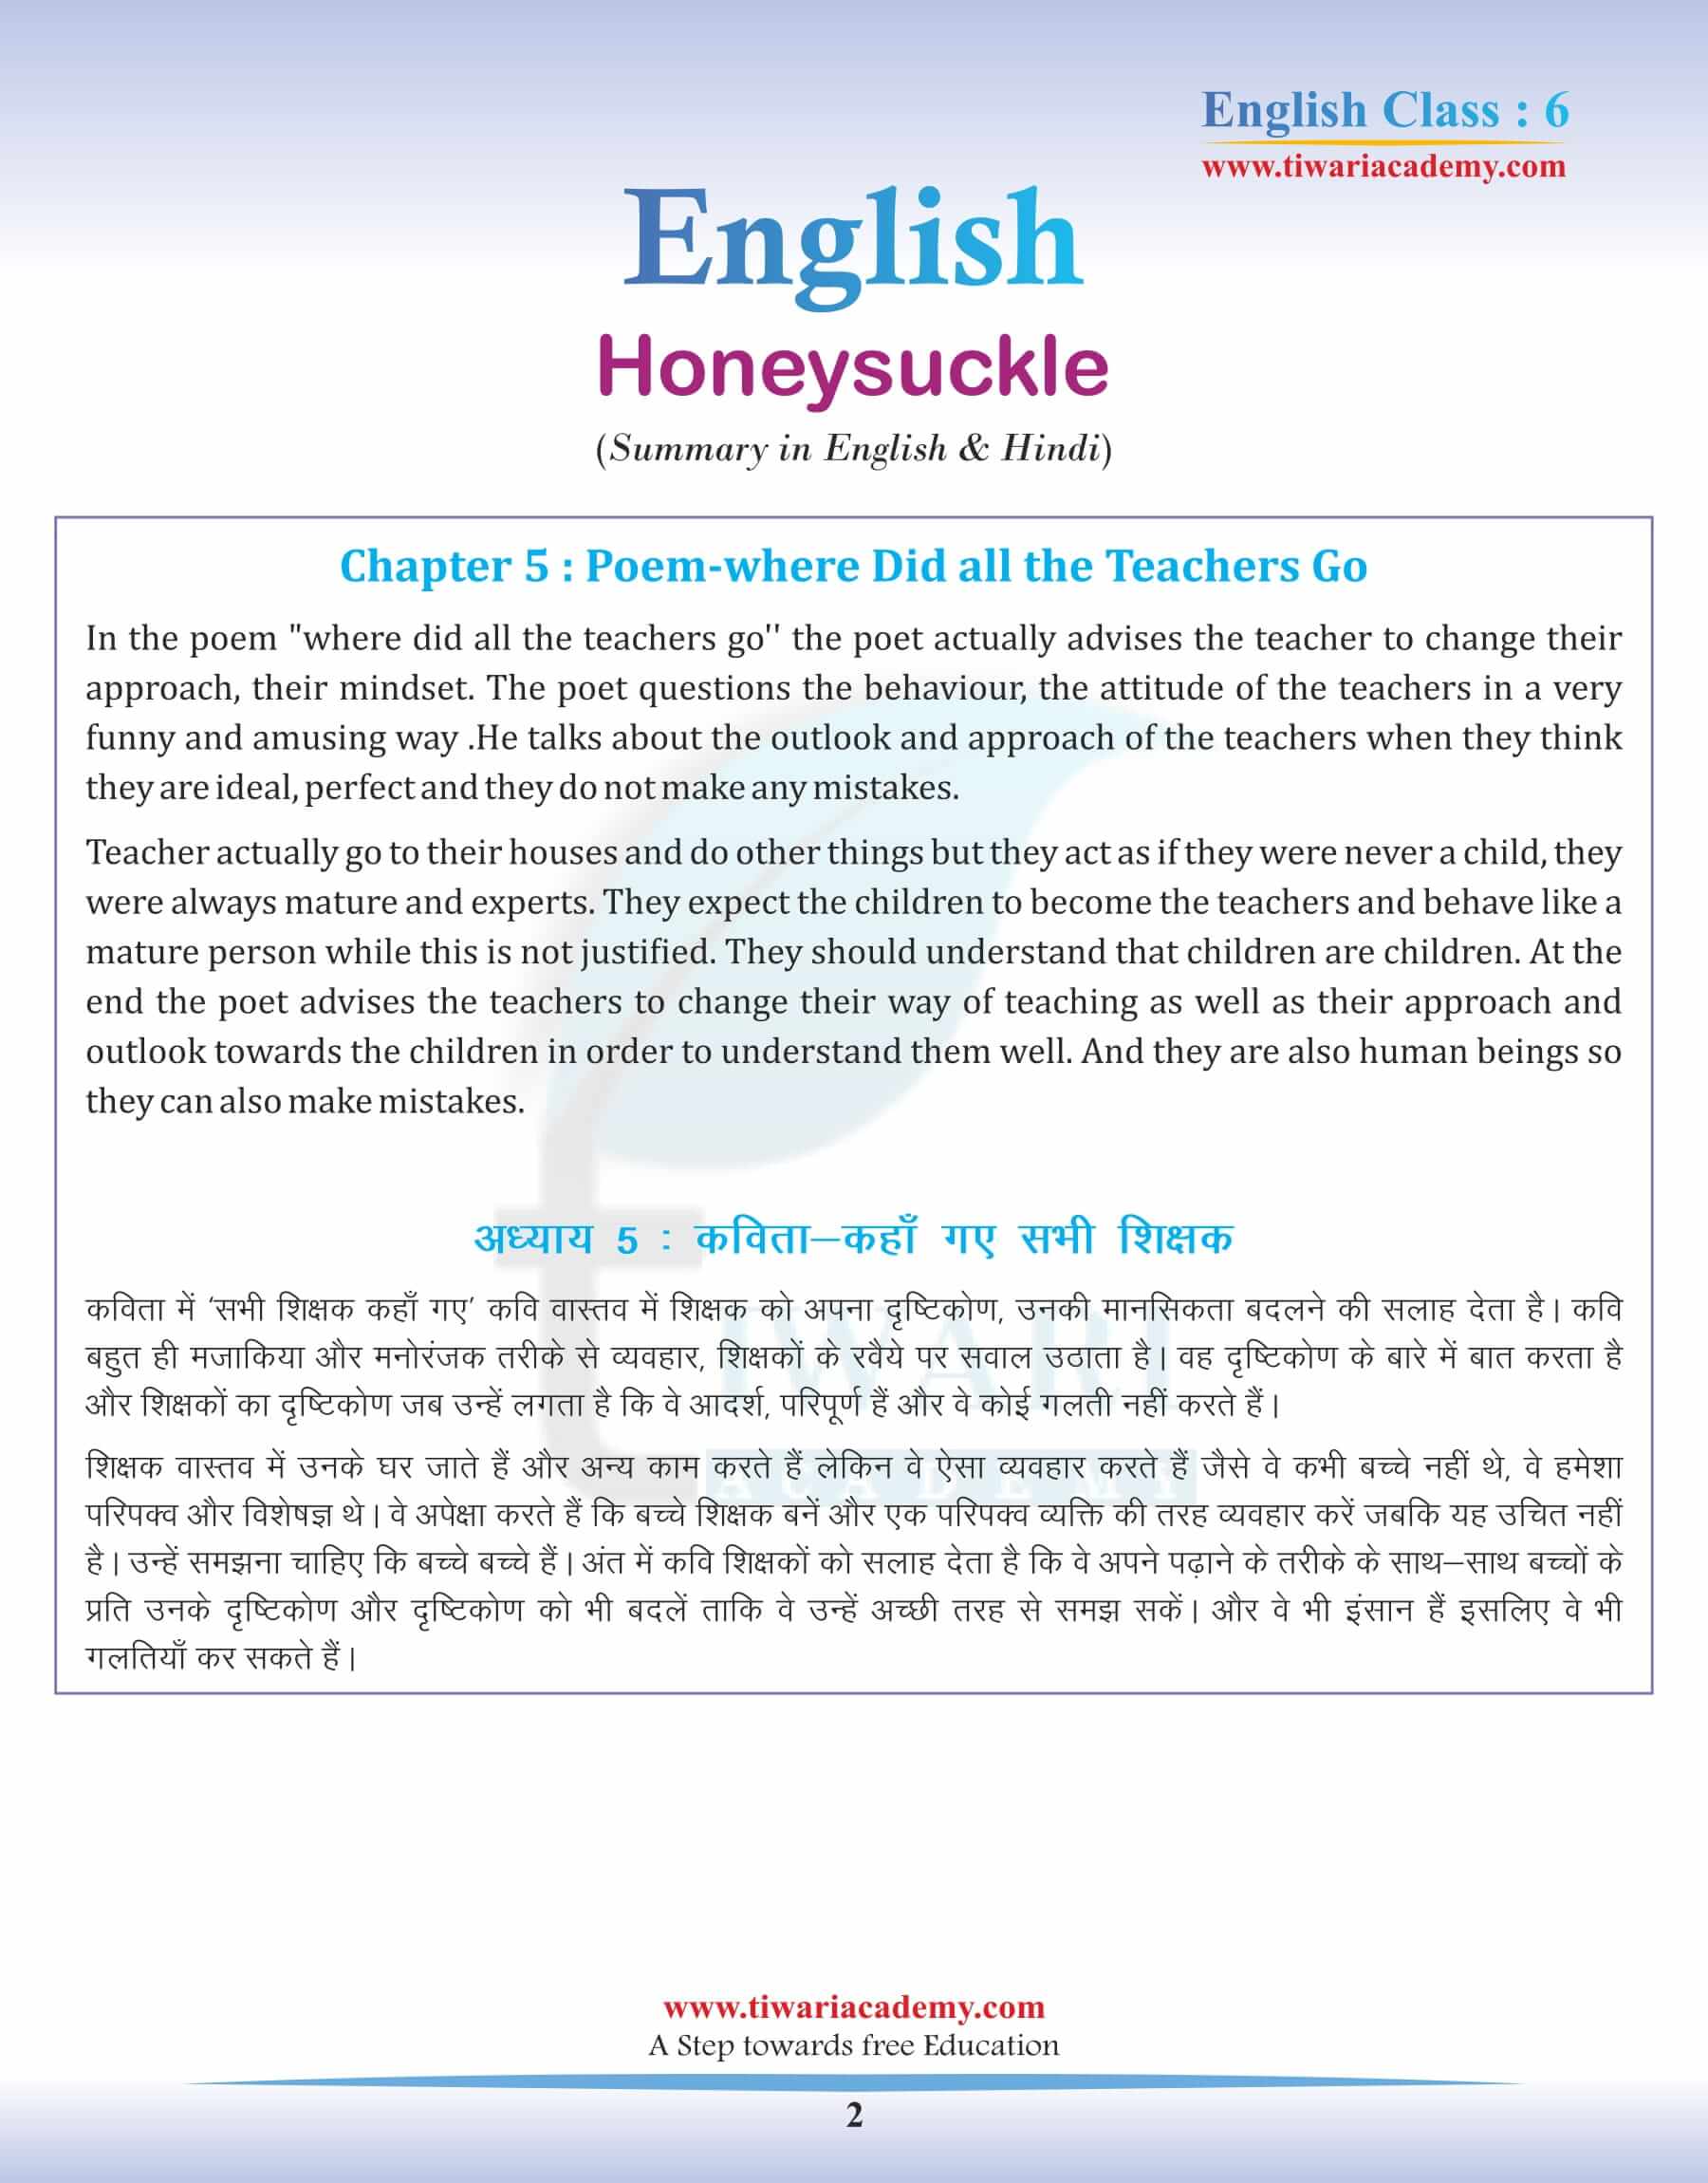 Class 6 English Chapter 5 Poem Summary in Hindi and English